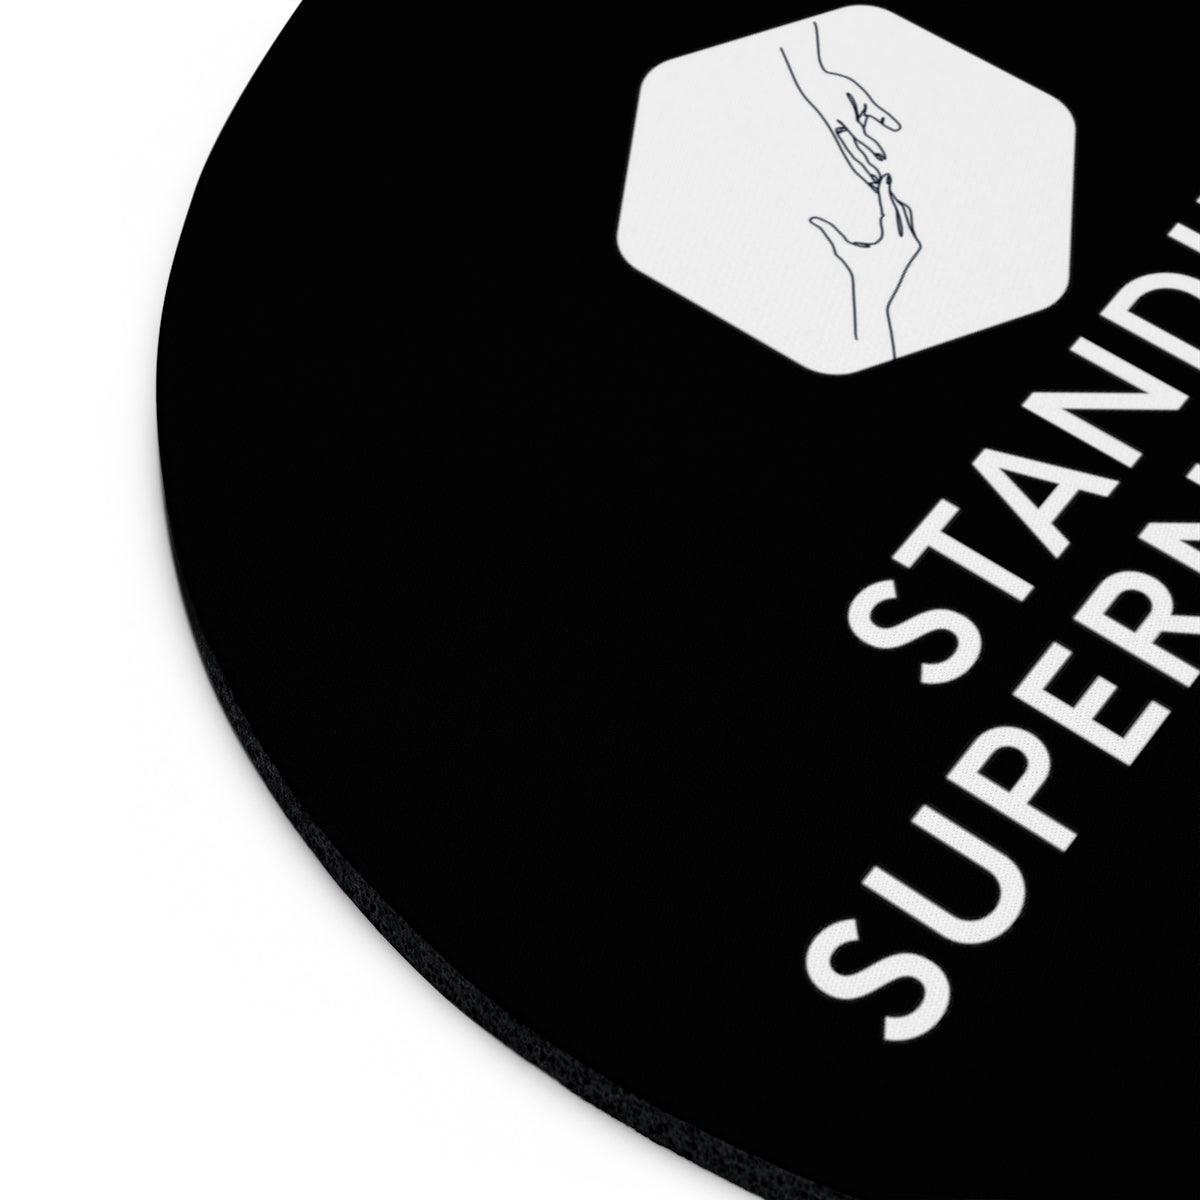 "Standing Supernaturally" Mouse Pad